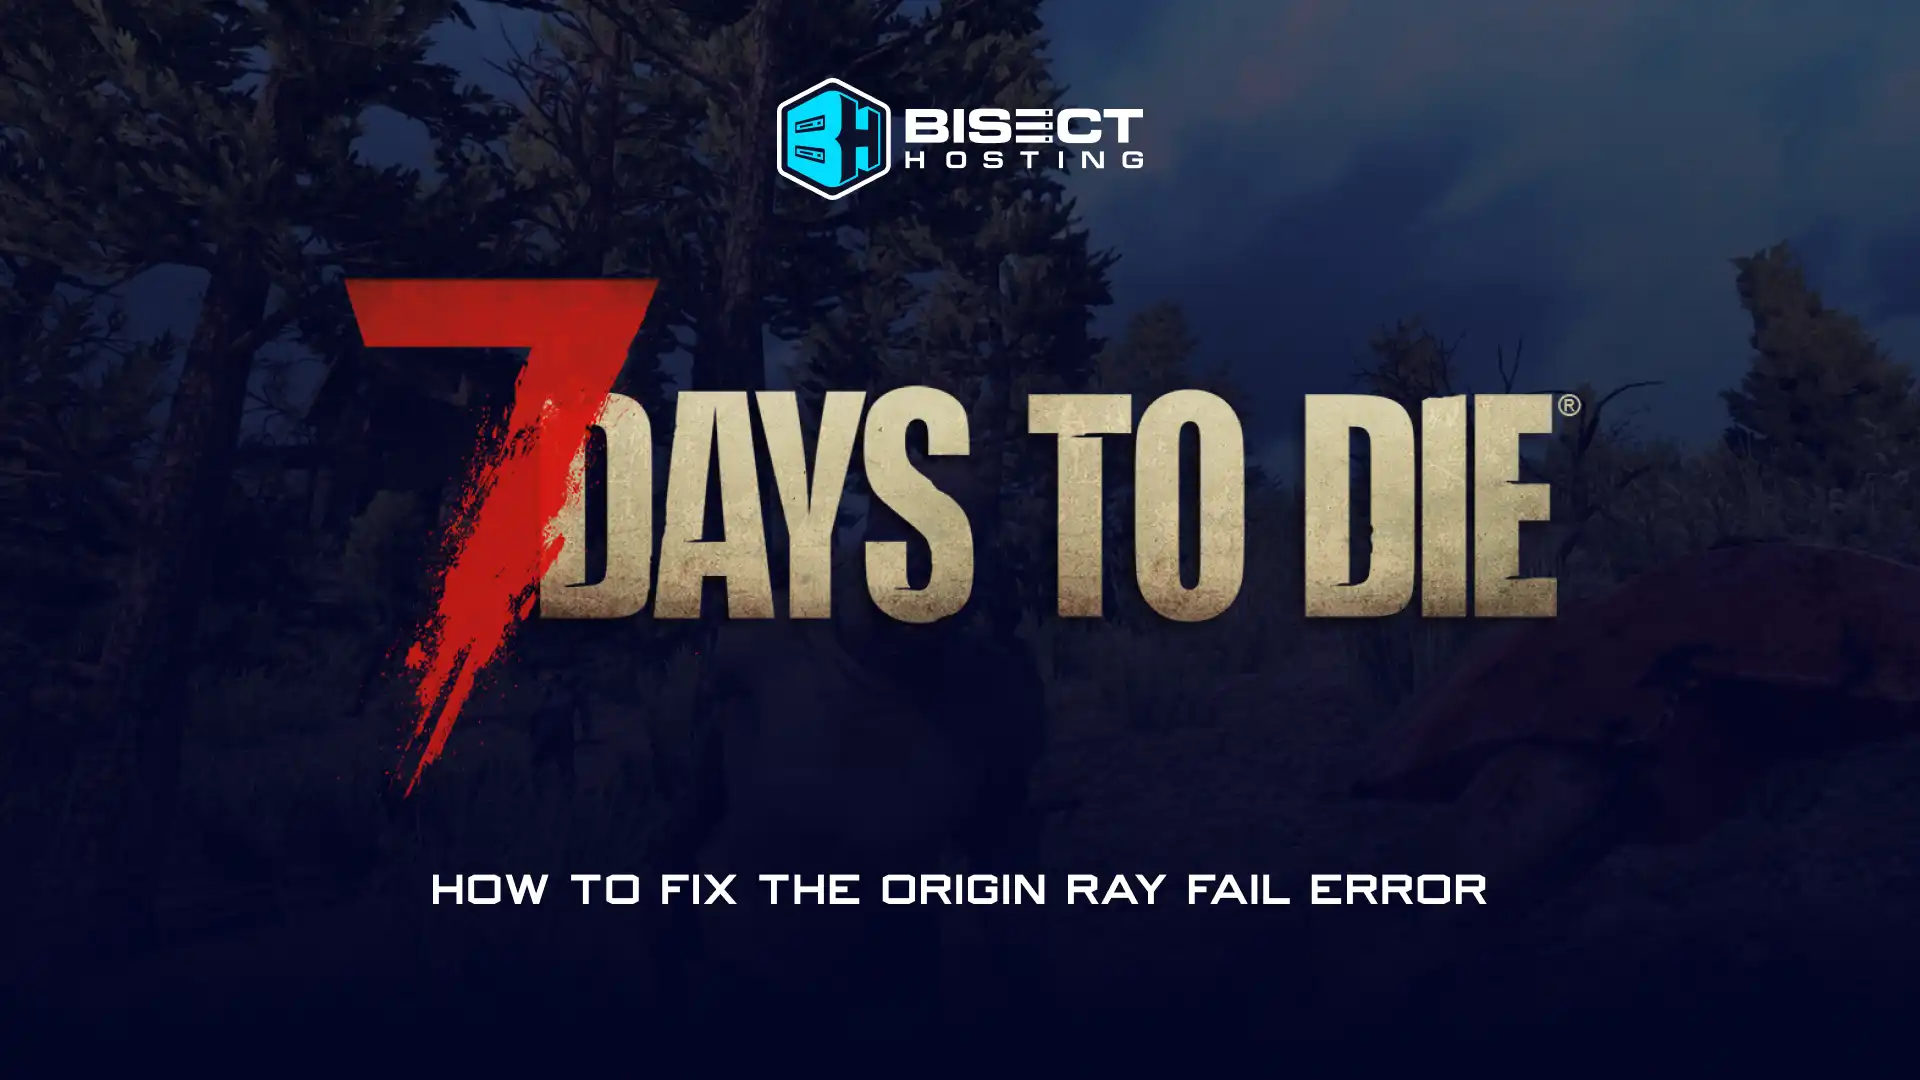 How to Fix the Origin Ray Fail Error in 7 Days To Die